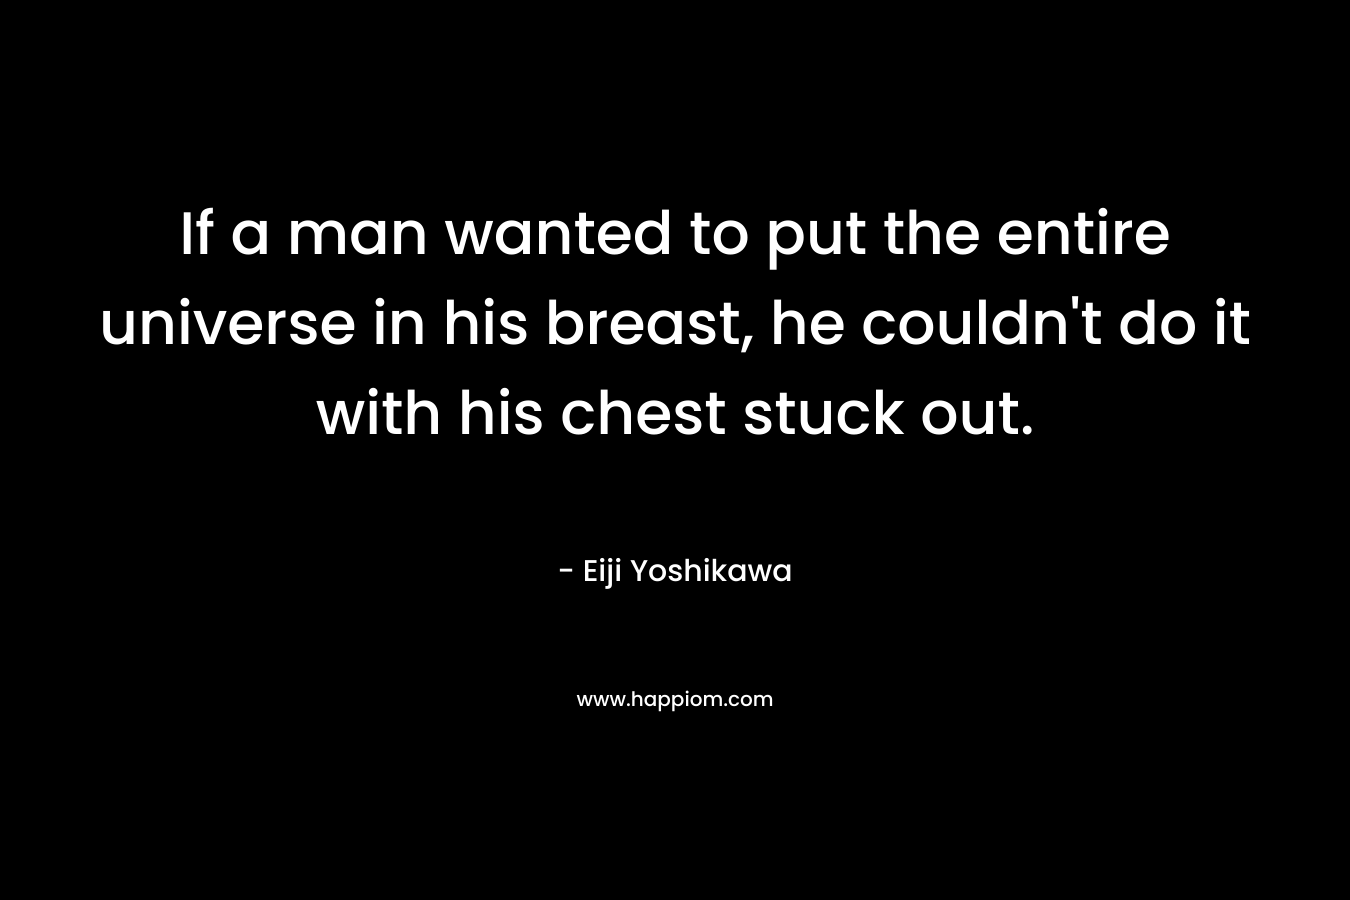 If a man wanted to put the entire universe in his breast, he couldn’t do it with his chest stuck out. – Eiji Yoshikawa